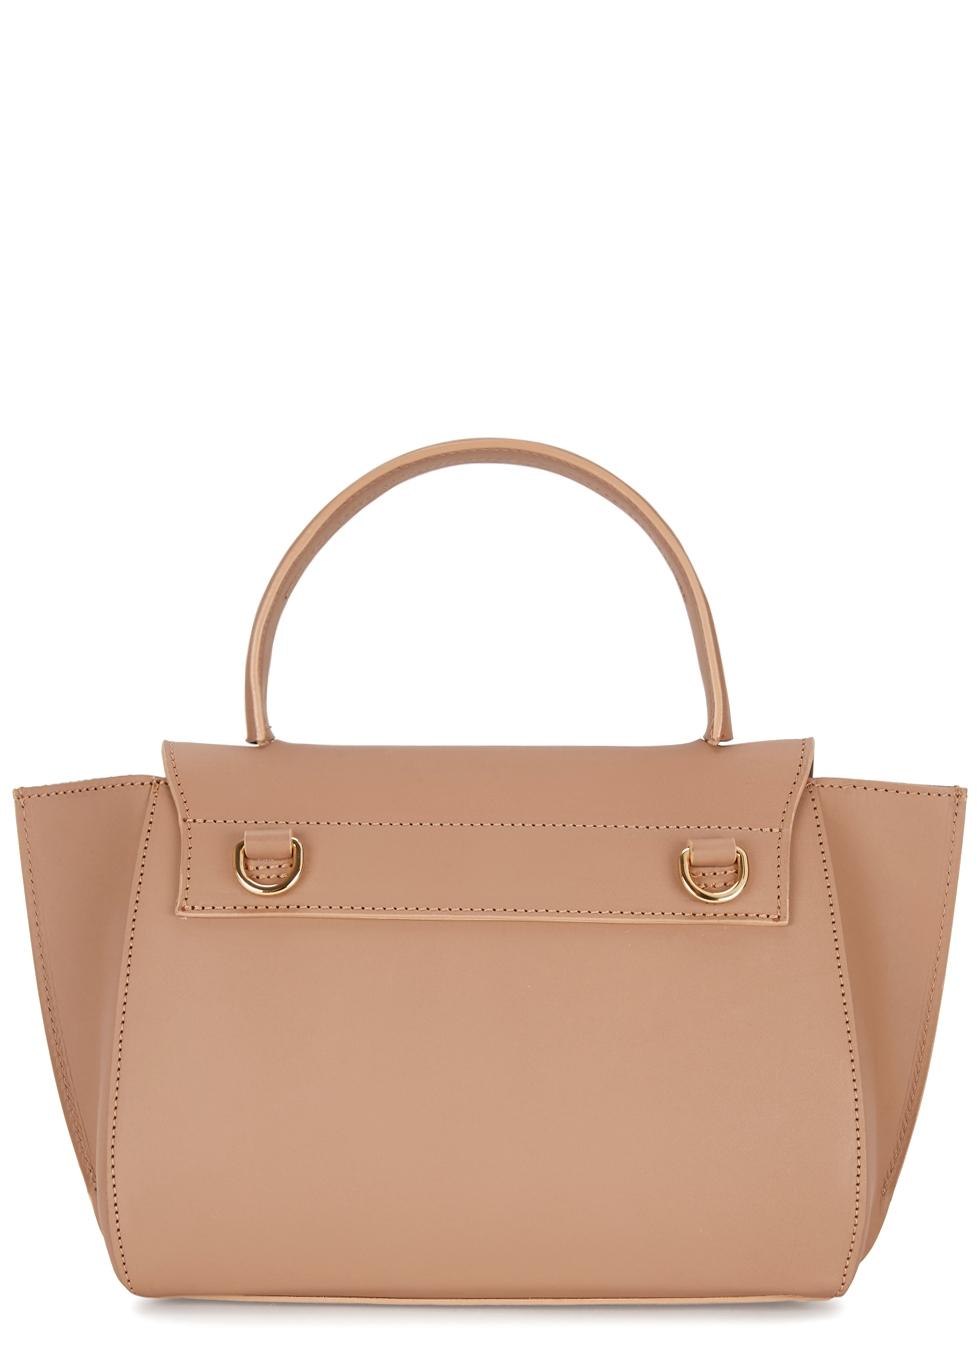 Atp Atelier Arezzo Camel Leather Shoulder Bag in Natural - Lyst